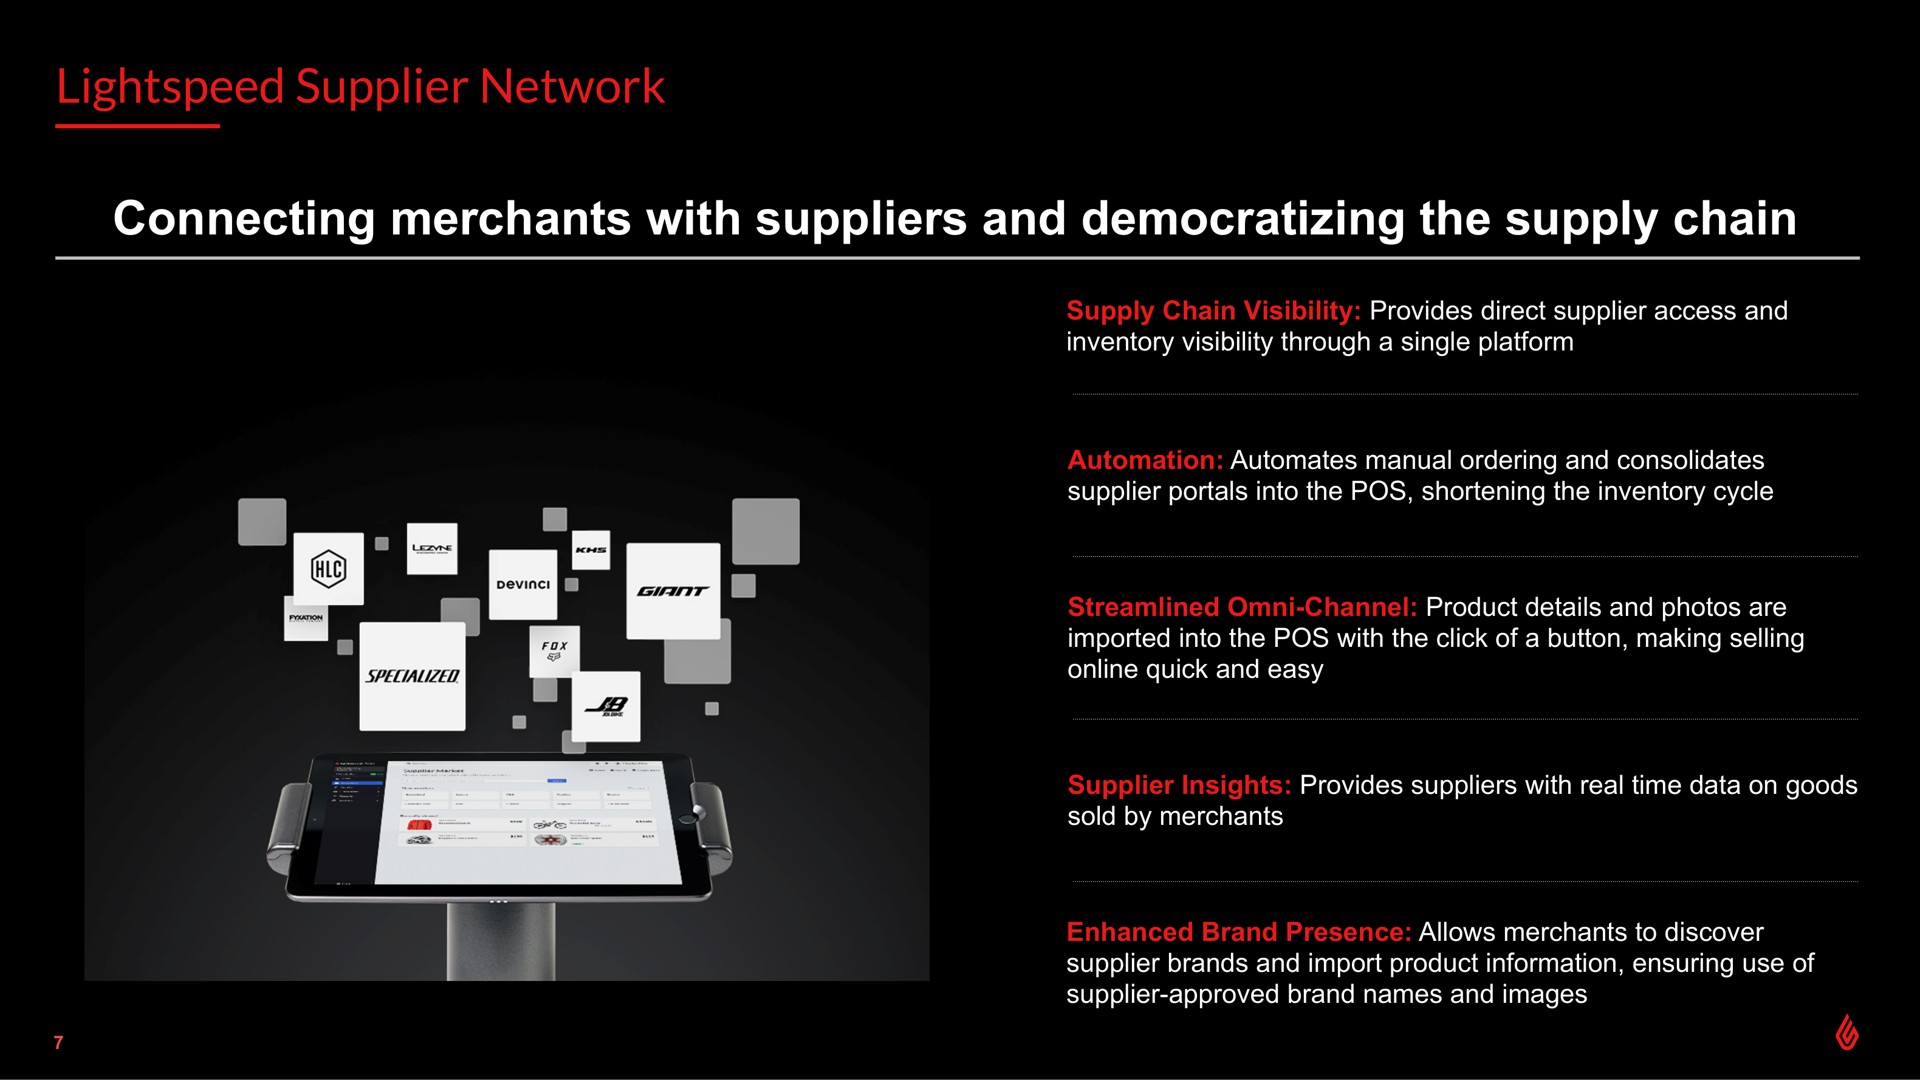 supplier network connecting merchants with suppliers and democratizing the supply chain | Lightspeed